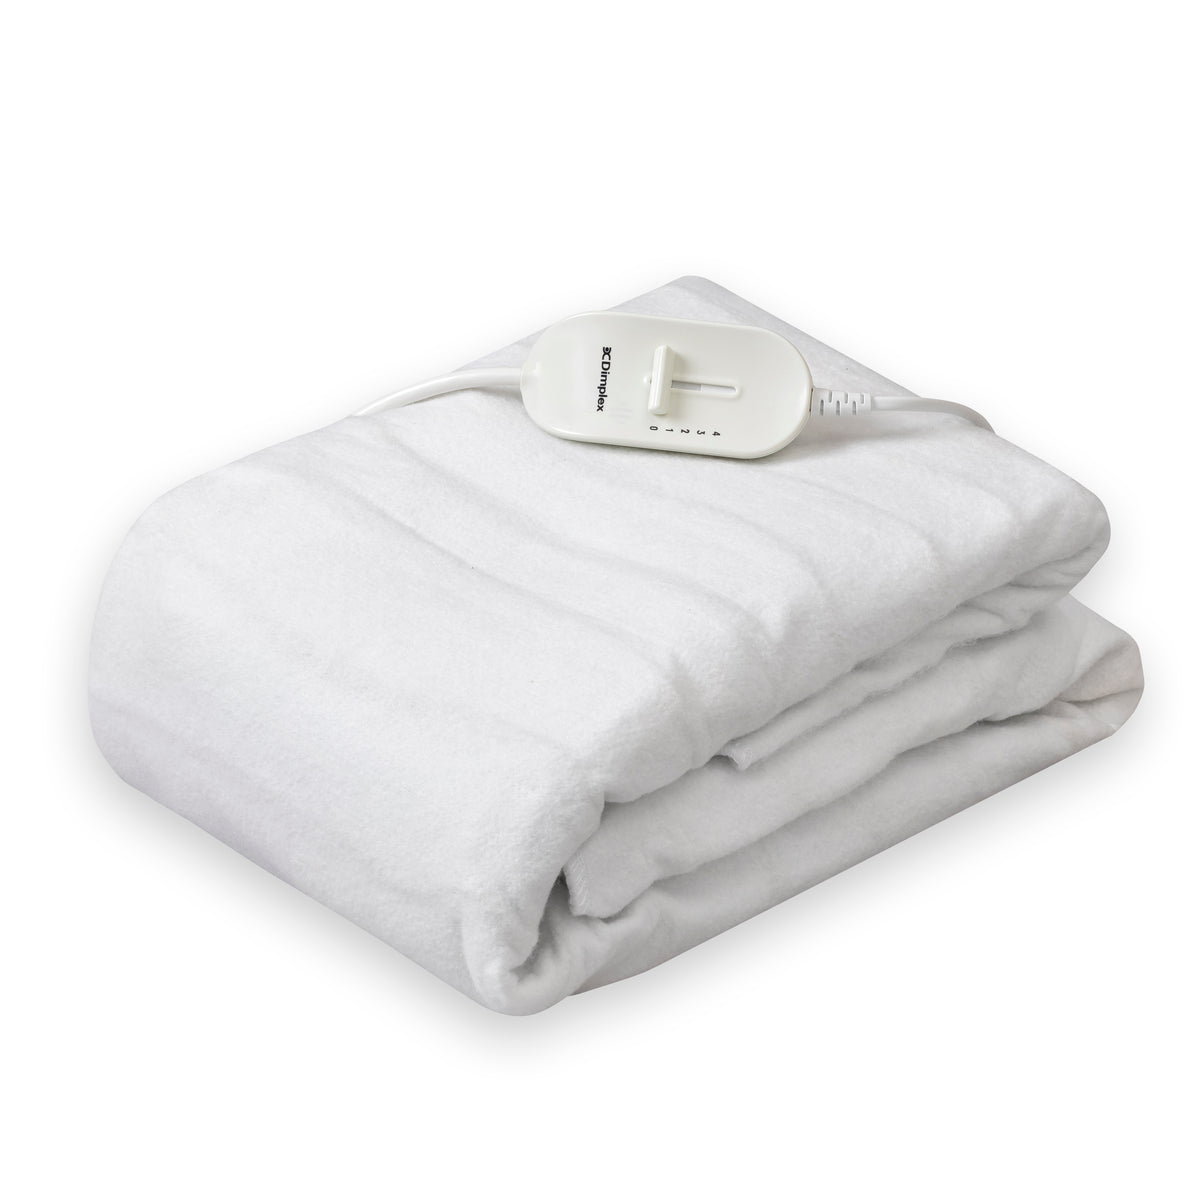 Dimplex Single Washable Electric Heated Underblanket - White | DUB1001 from Dimplex - DID Electrical